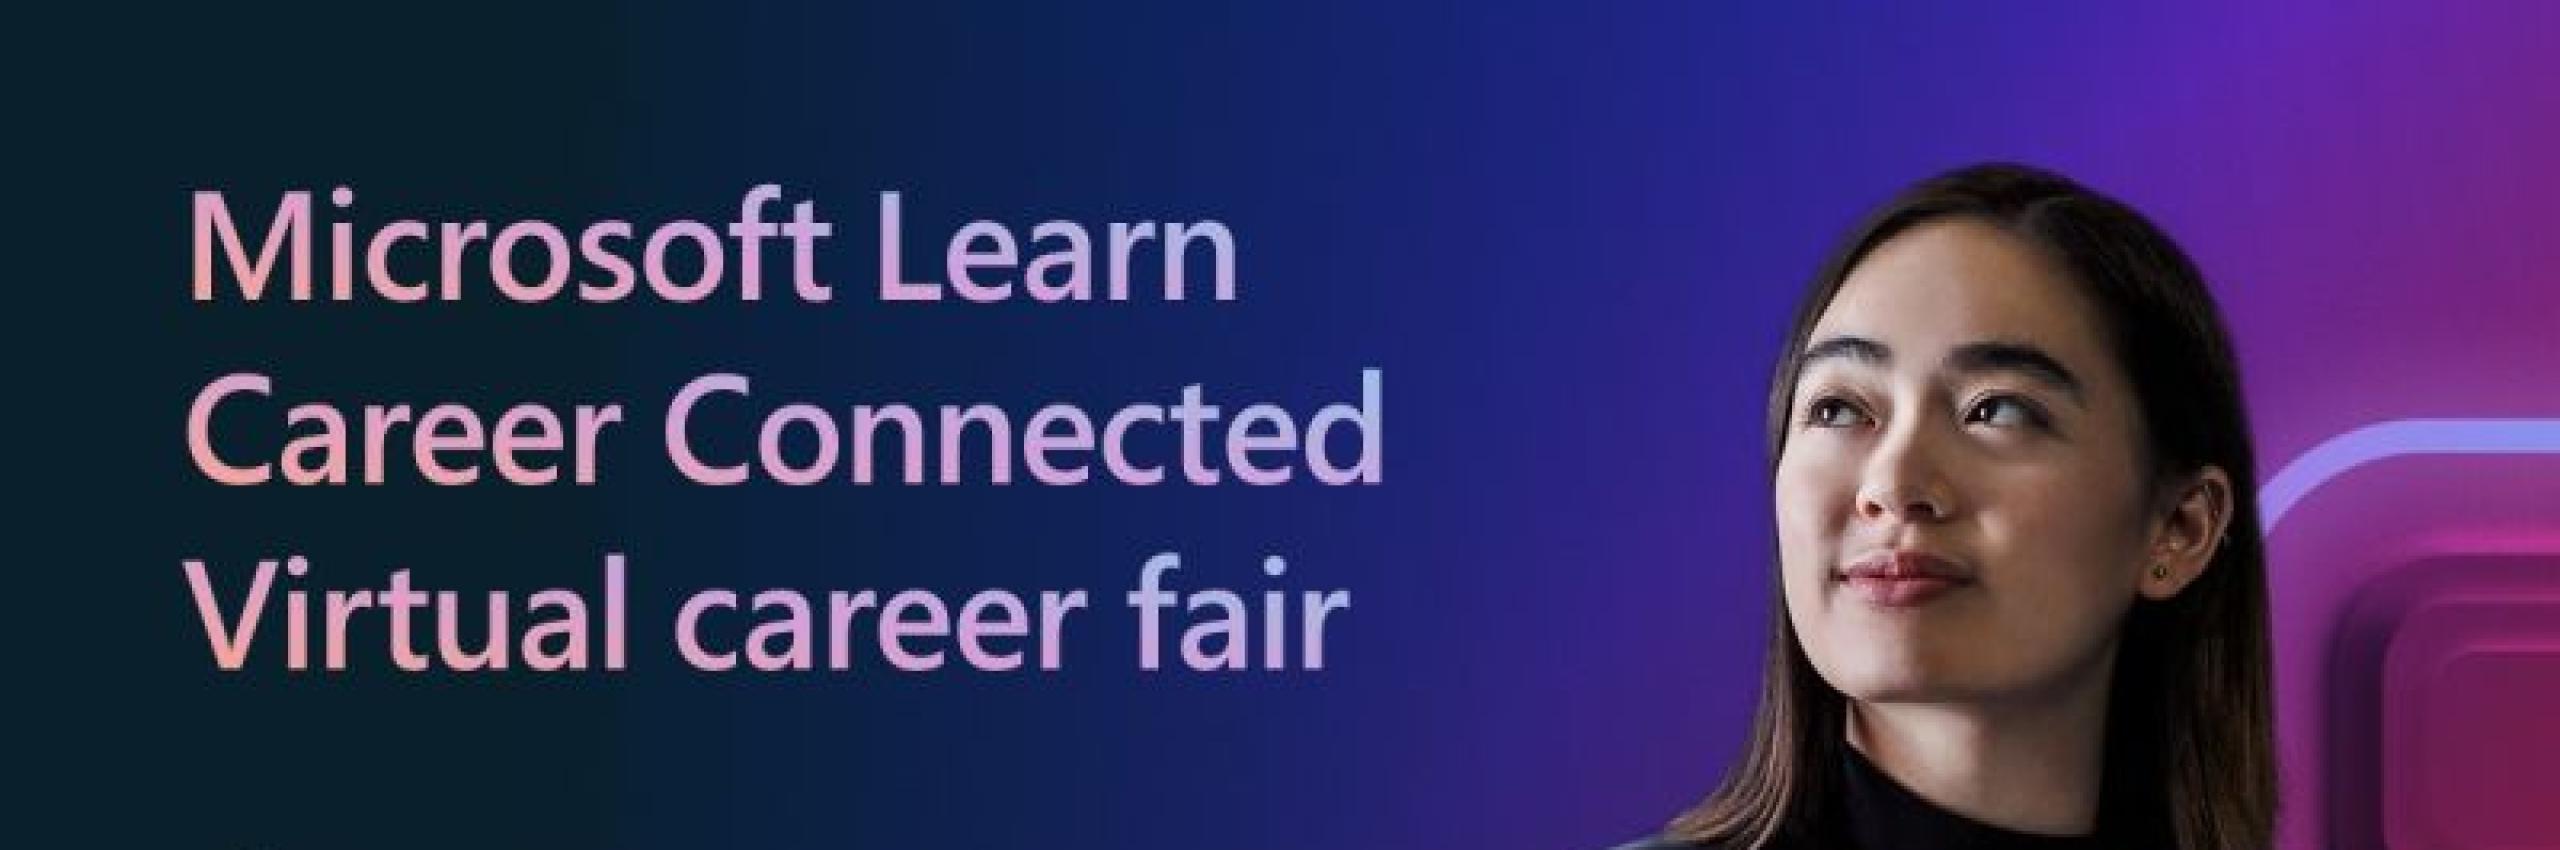 Microsoft Learn Career Connected